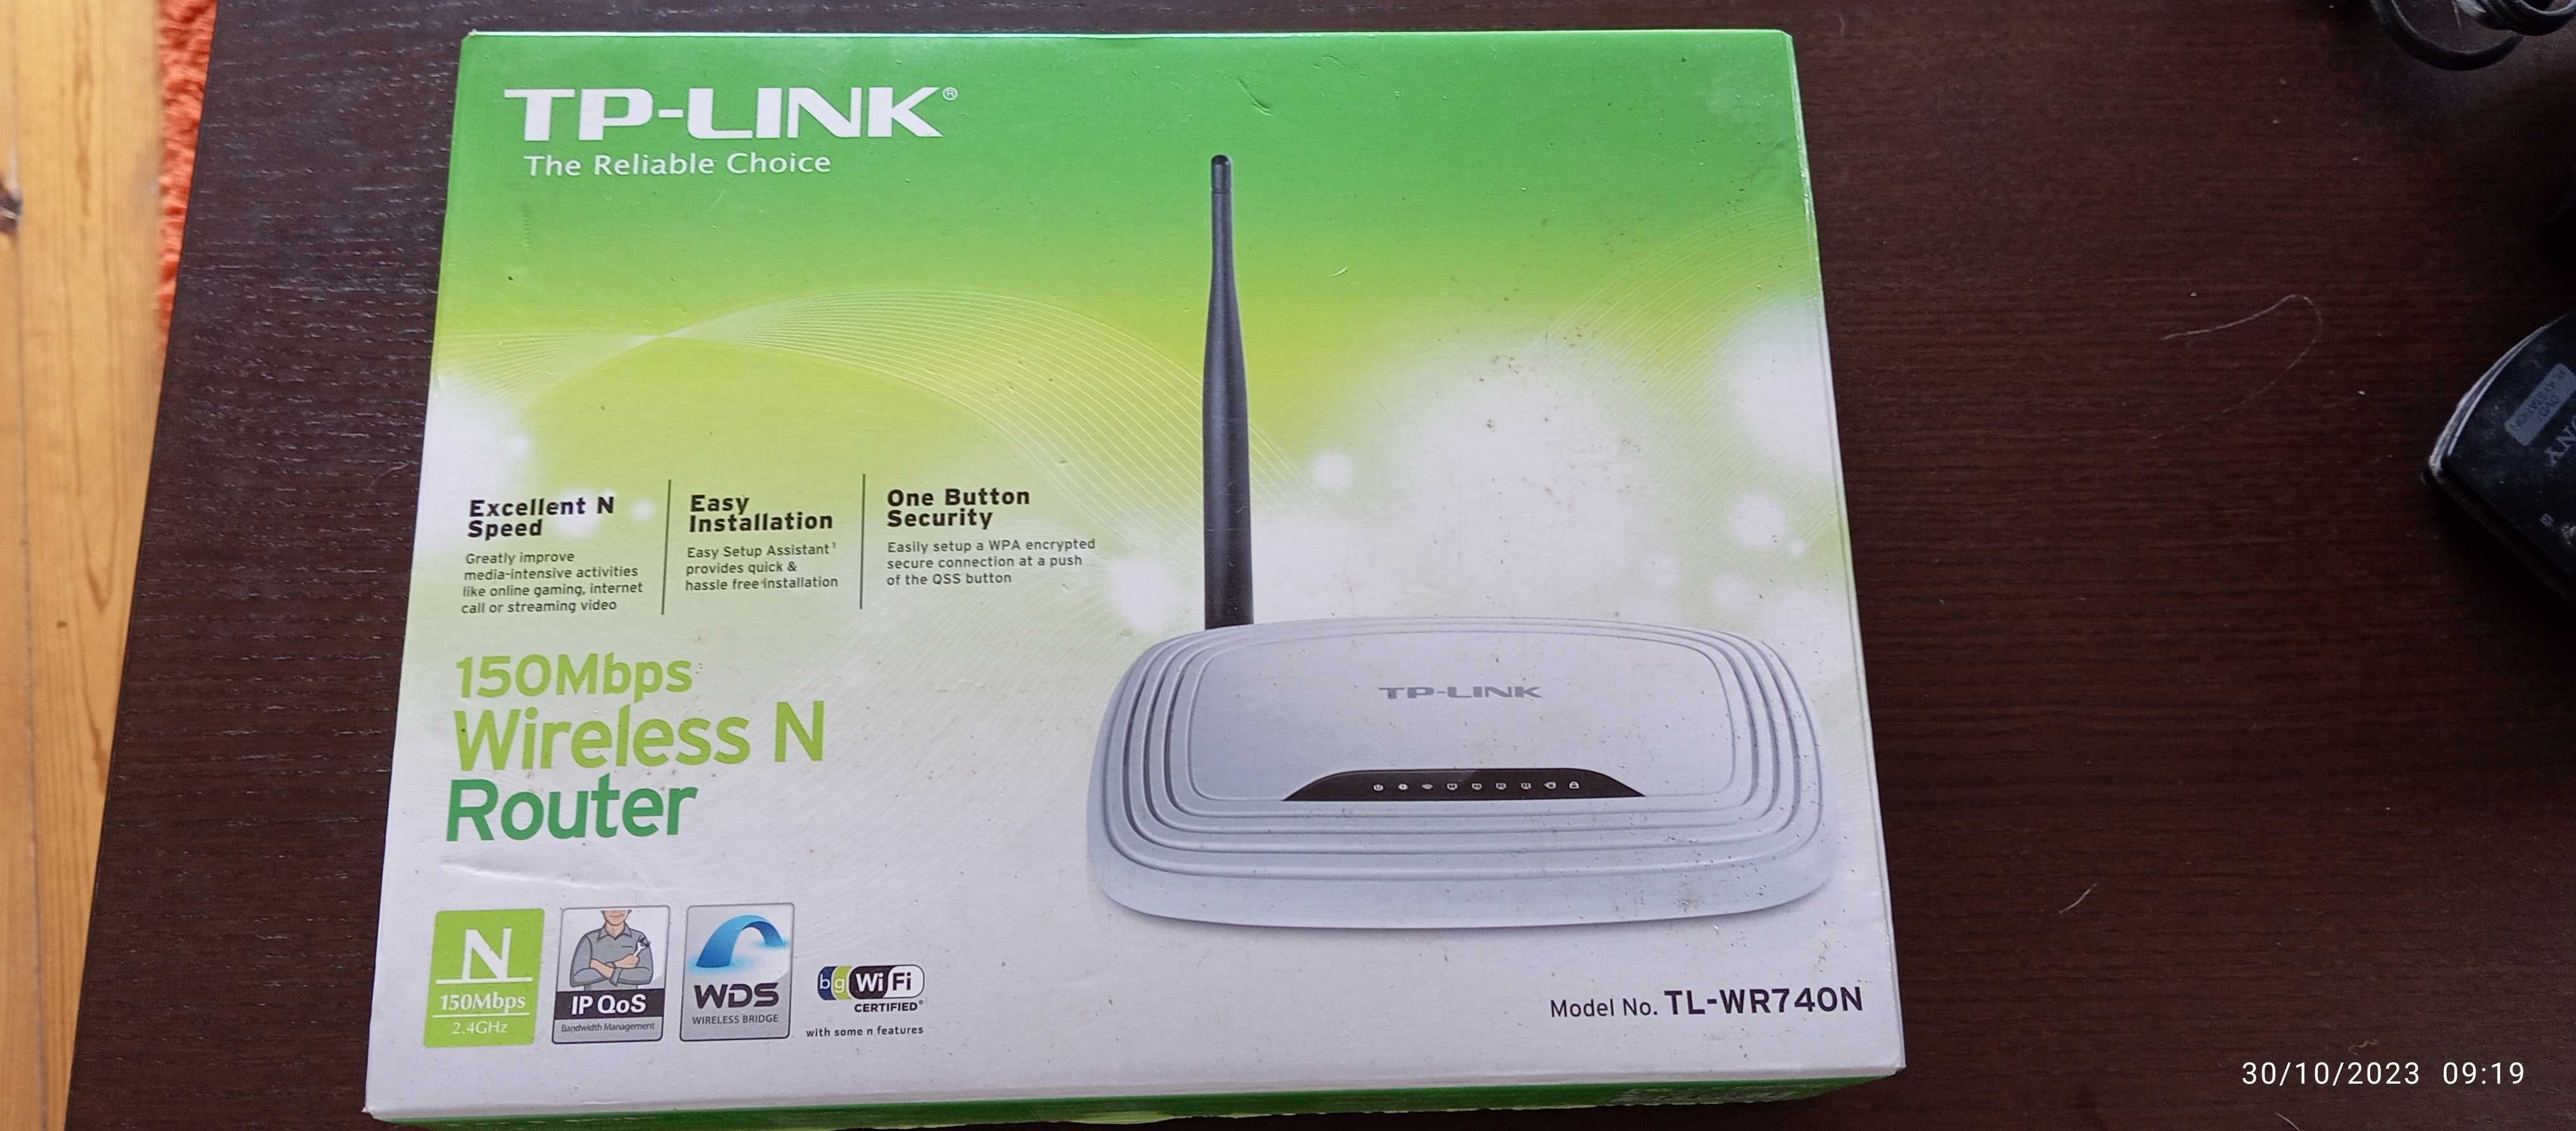 Wireless N Router TP-Link (150MB)